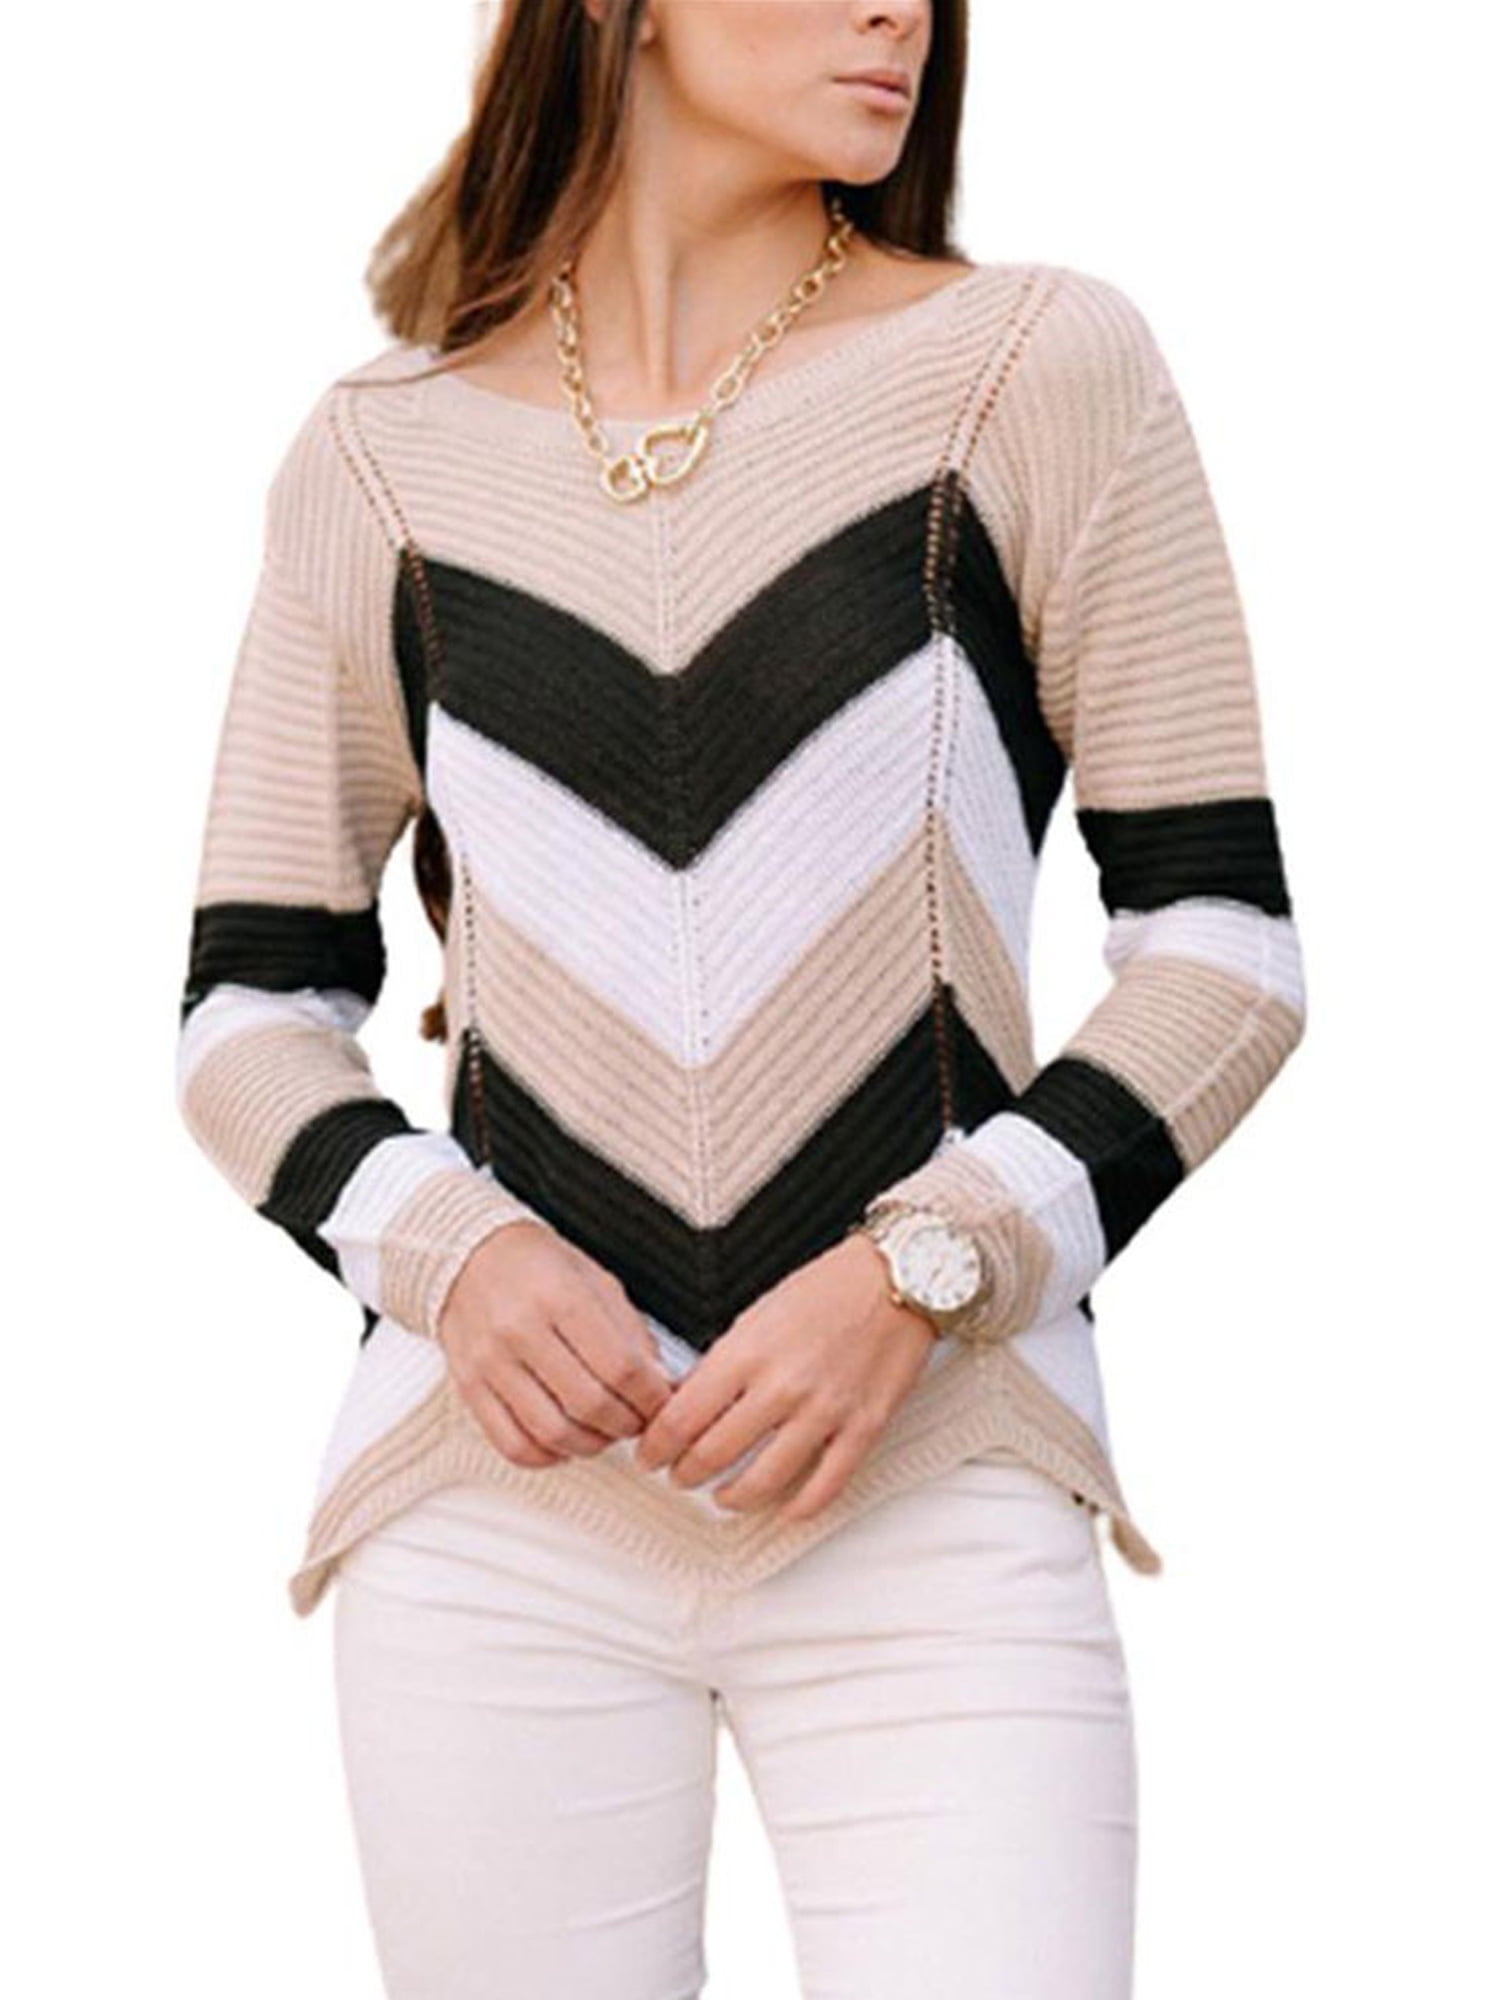 Knit Neck Pullover Long Sweater Tops Womens Black Blouse Jumper Sleeve Striped V